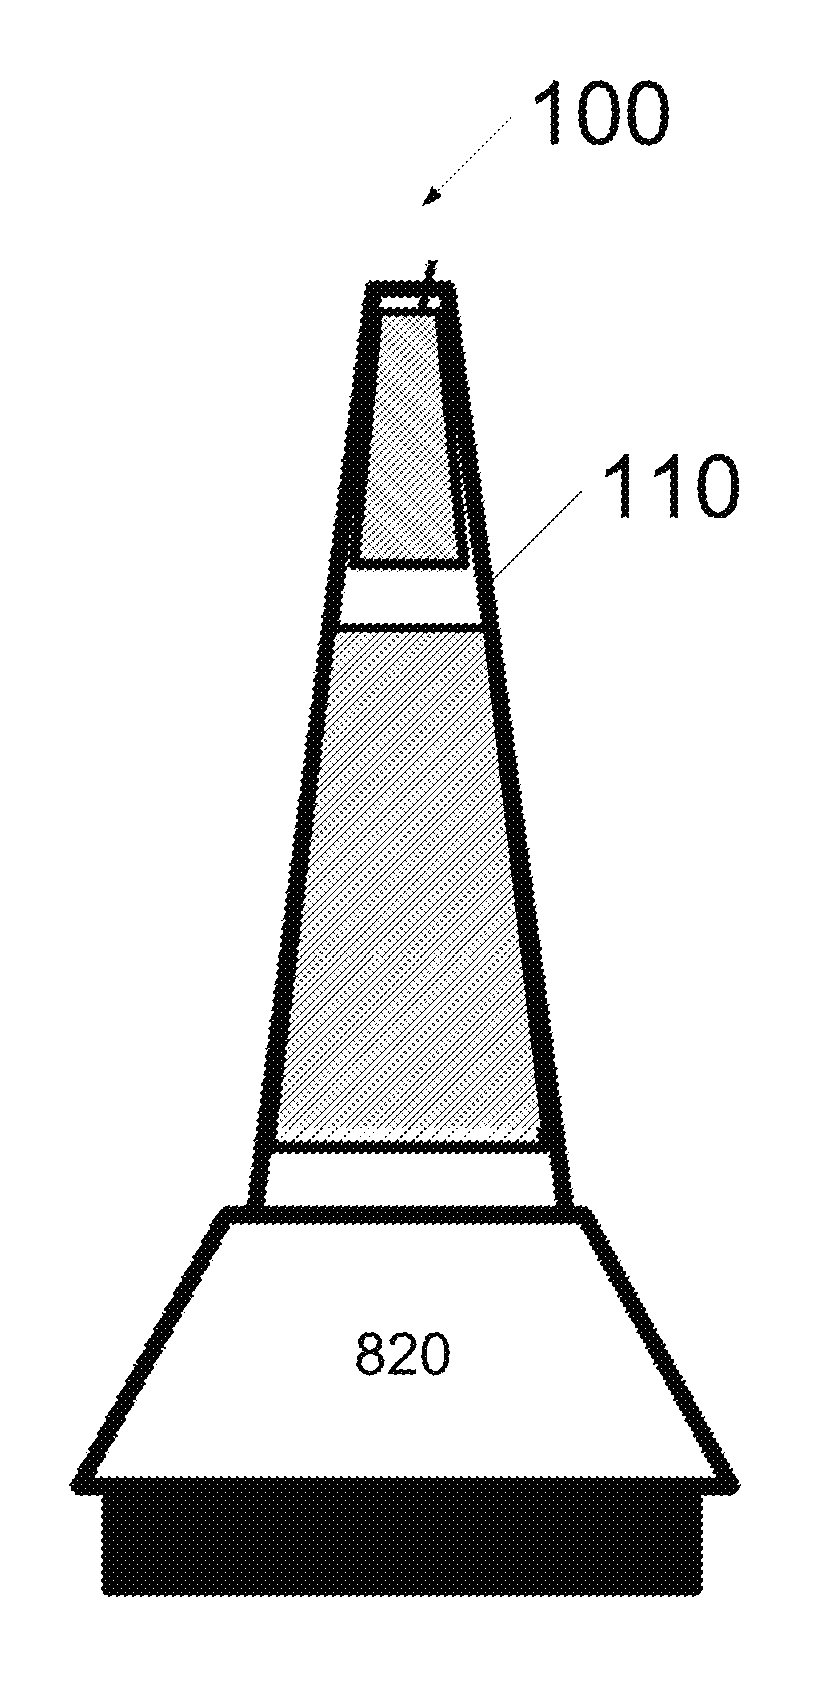 APPARATUS AND METHODS FOR PERFORMING BODY lMAGING